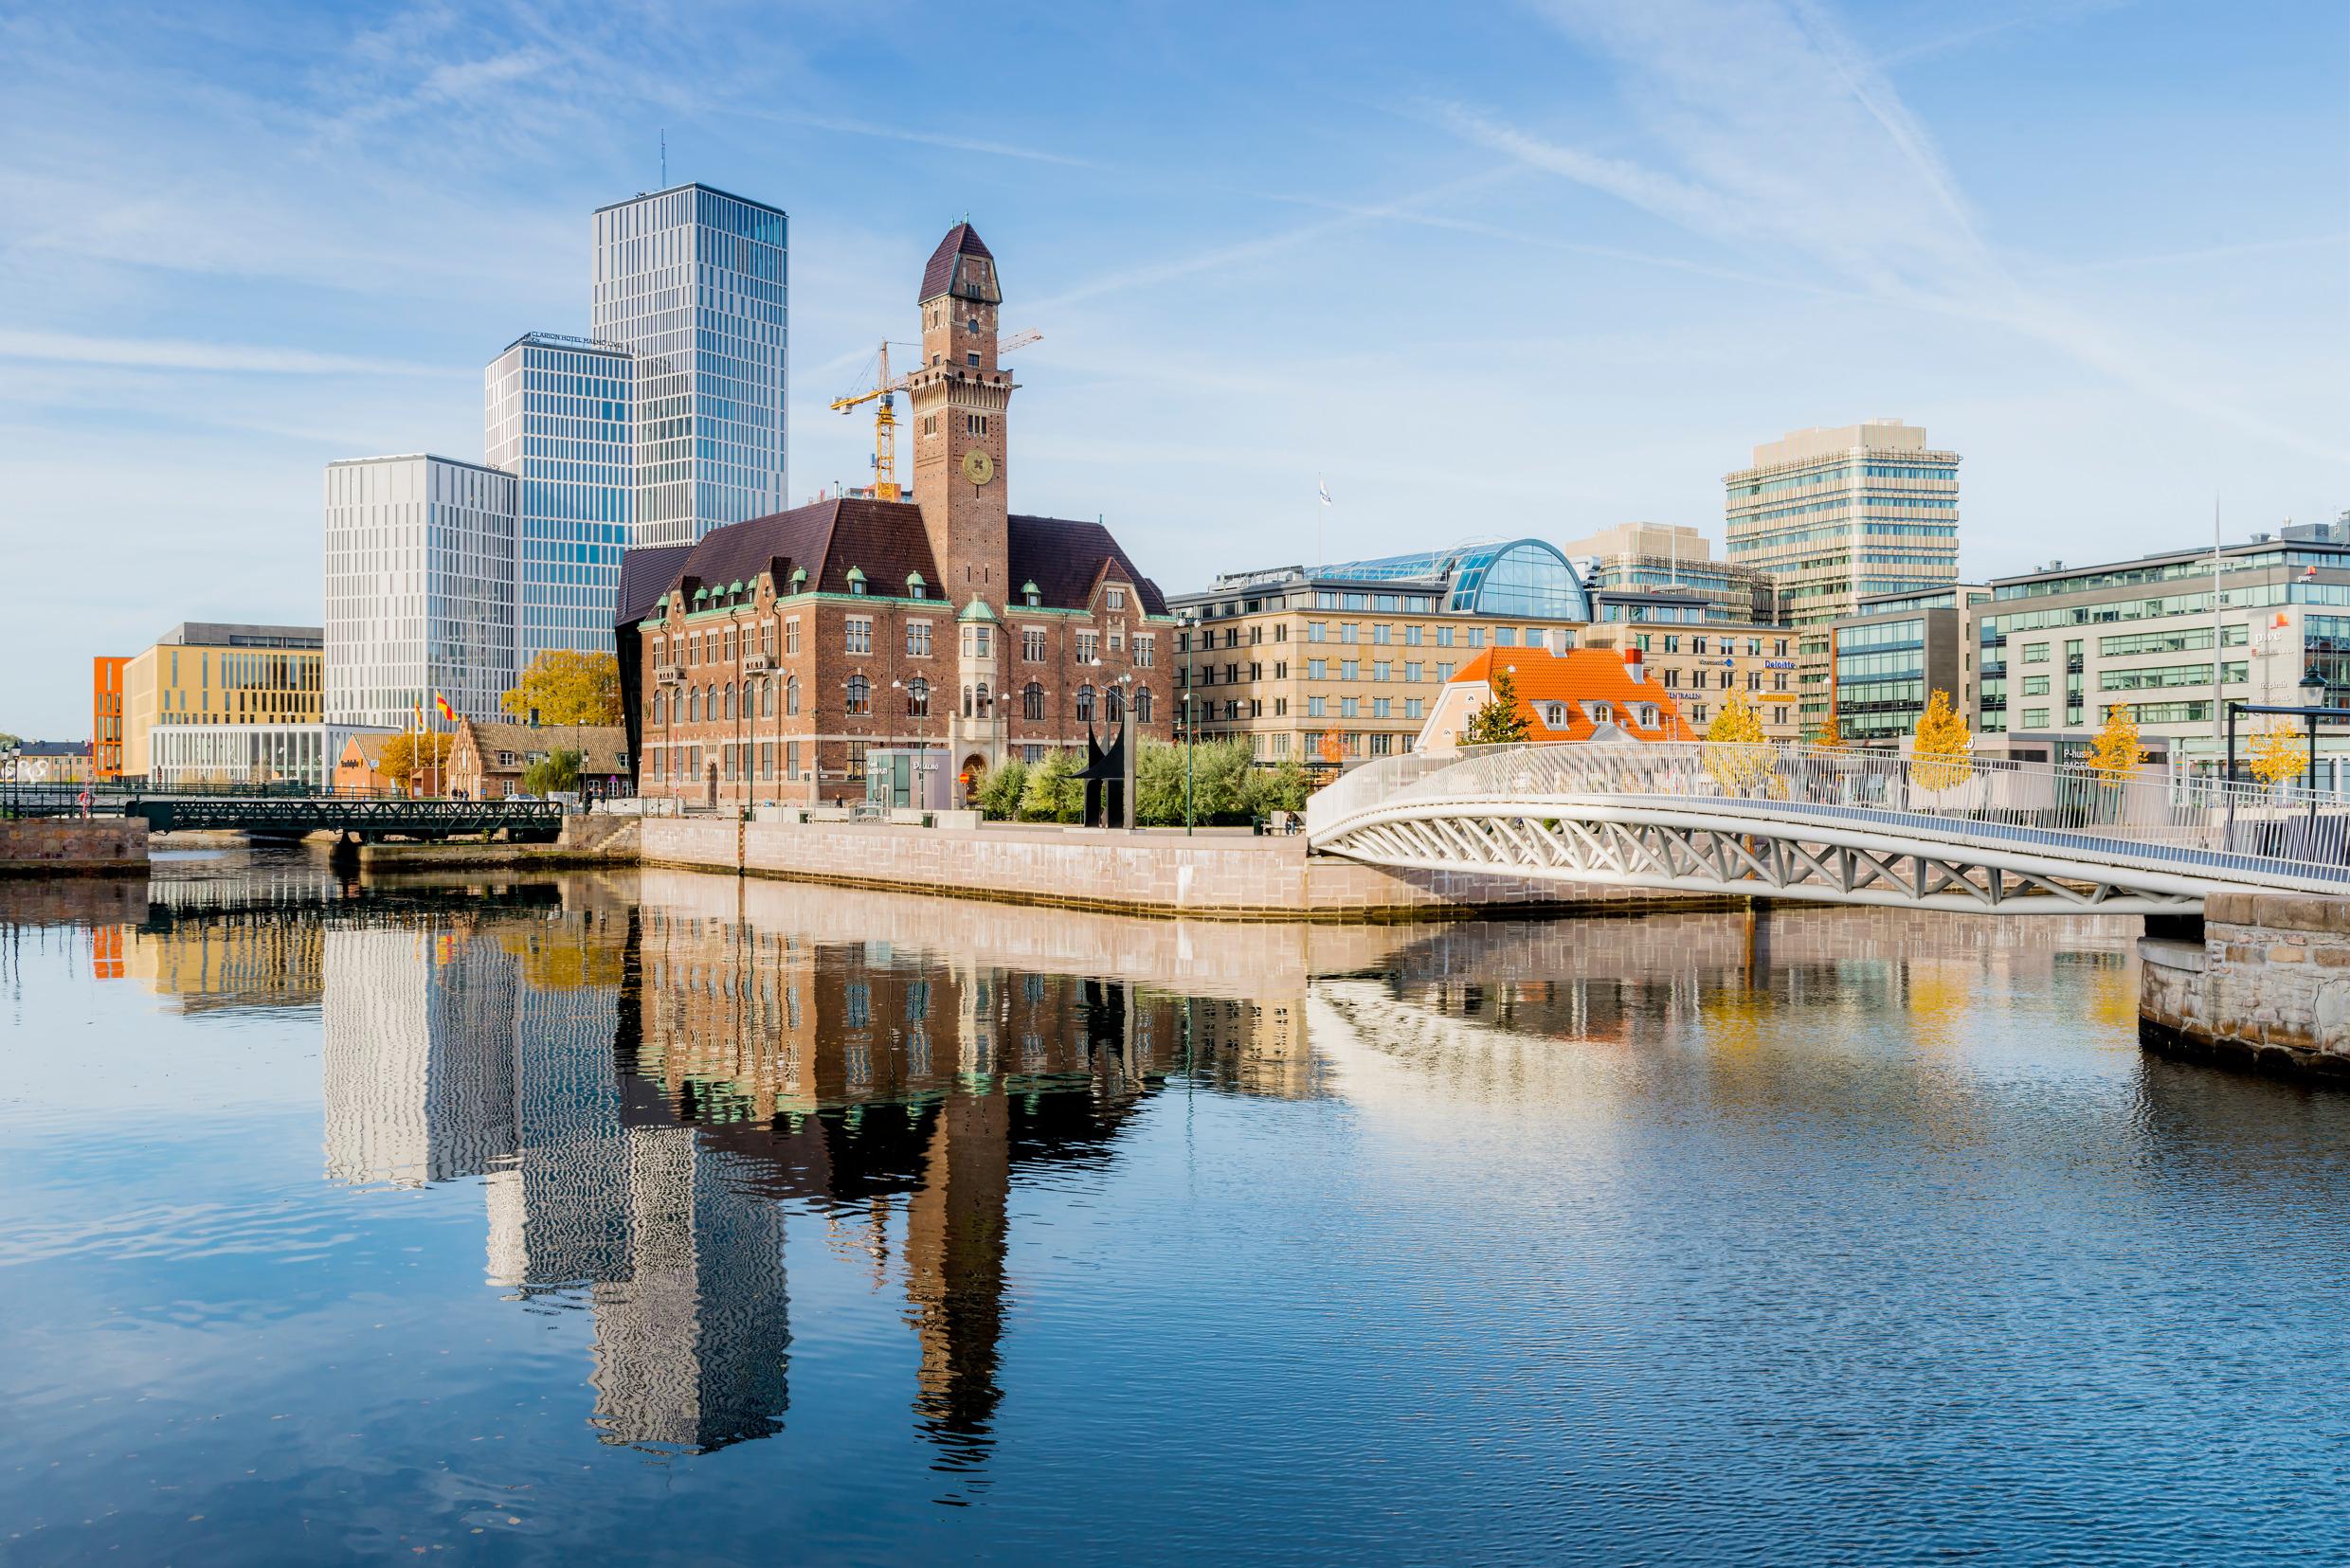 Malmö has beautiful architectural neighbourhoods, with both modern and historical buildnings.